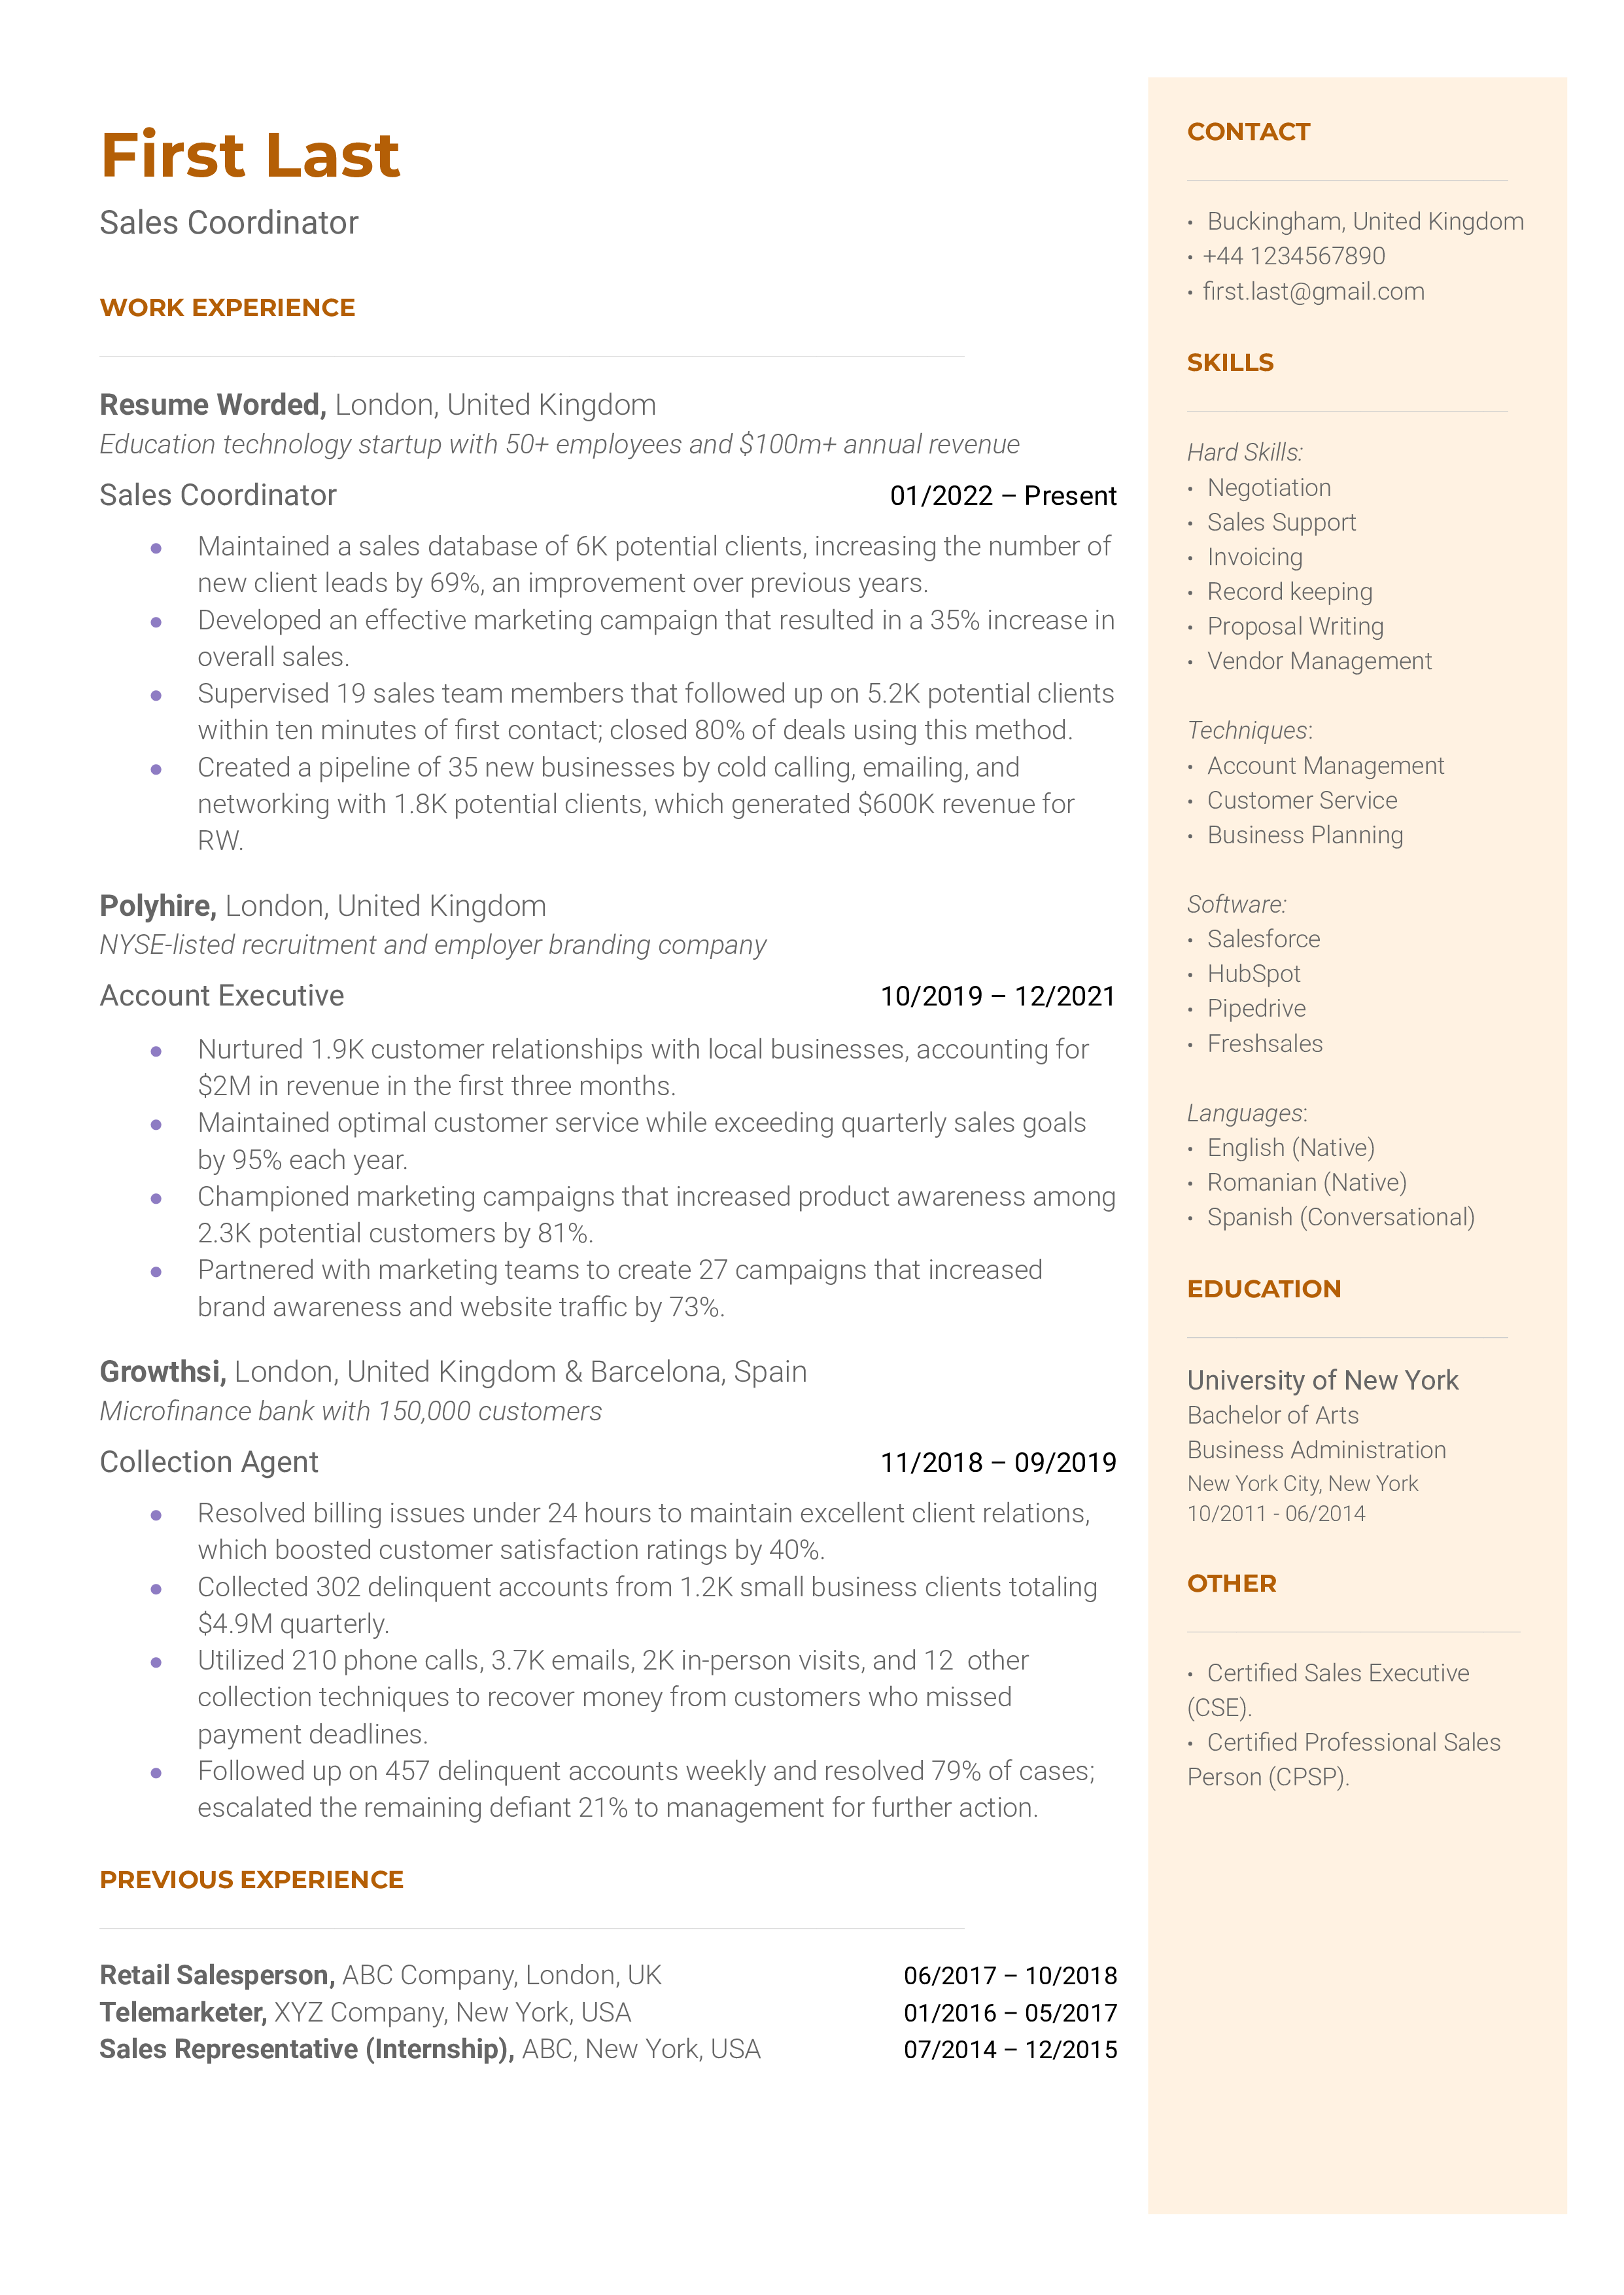 A well-organized CV for a Sales Coordinator role.